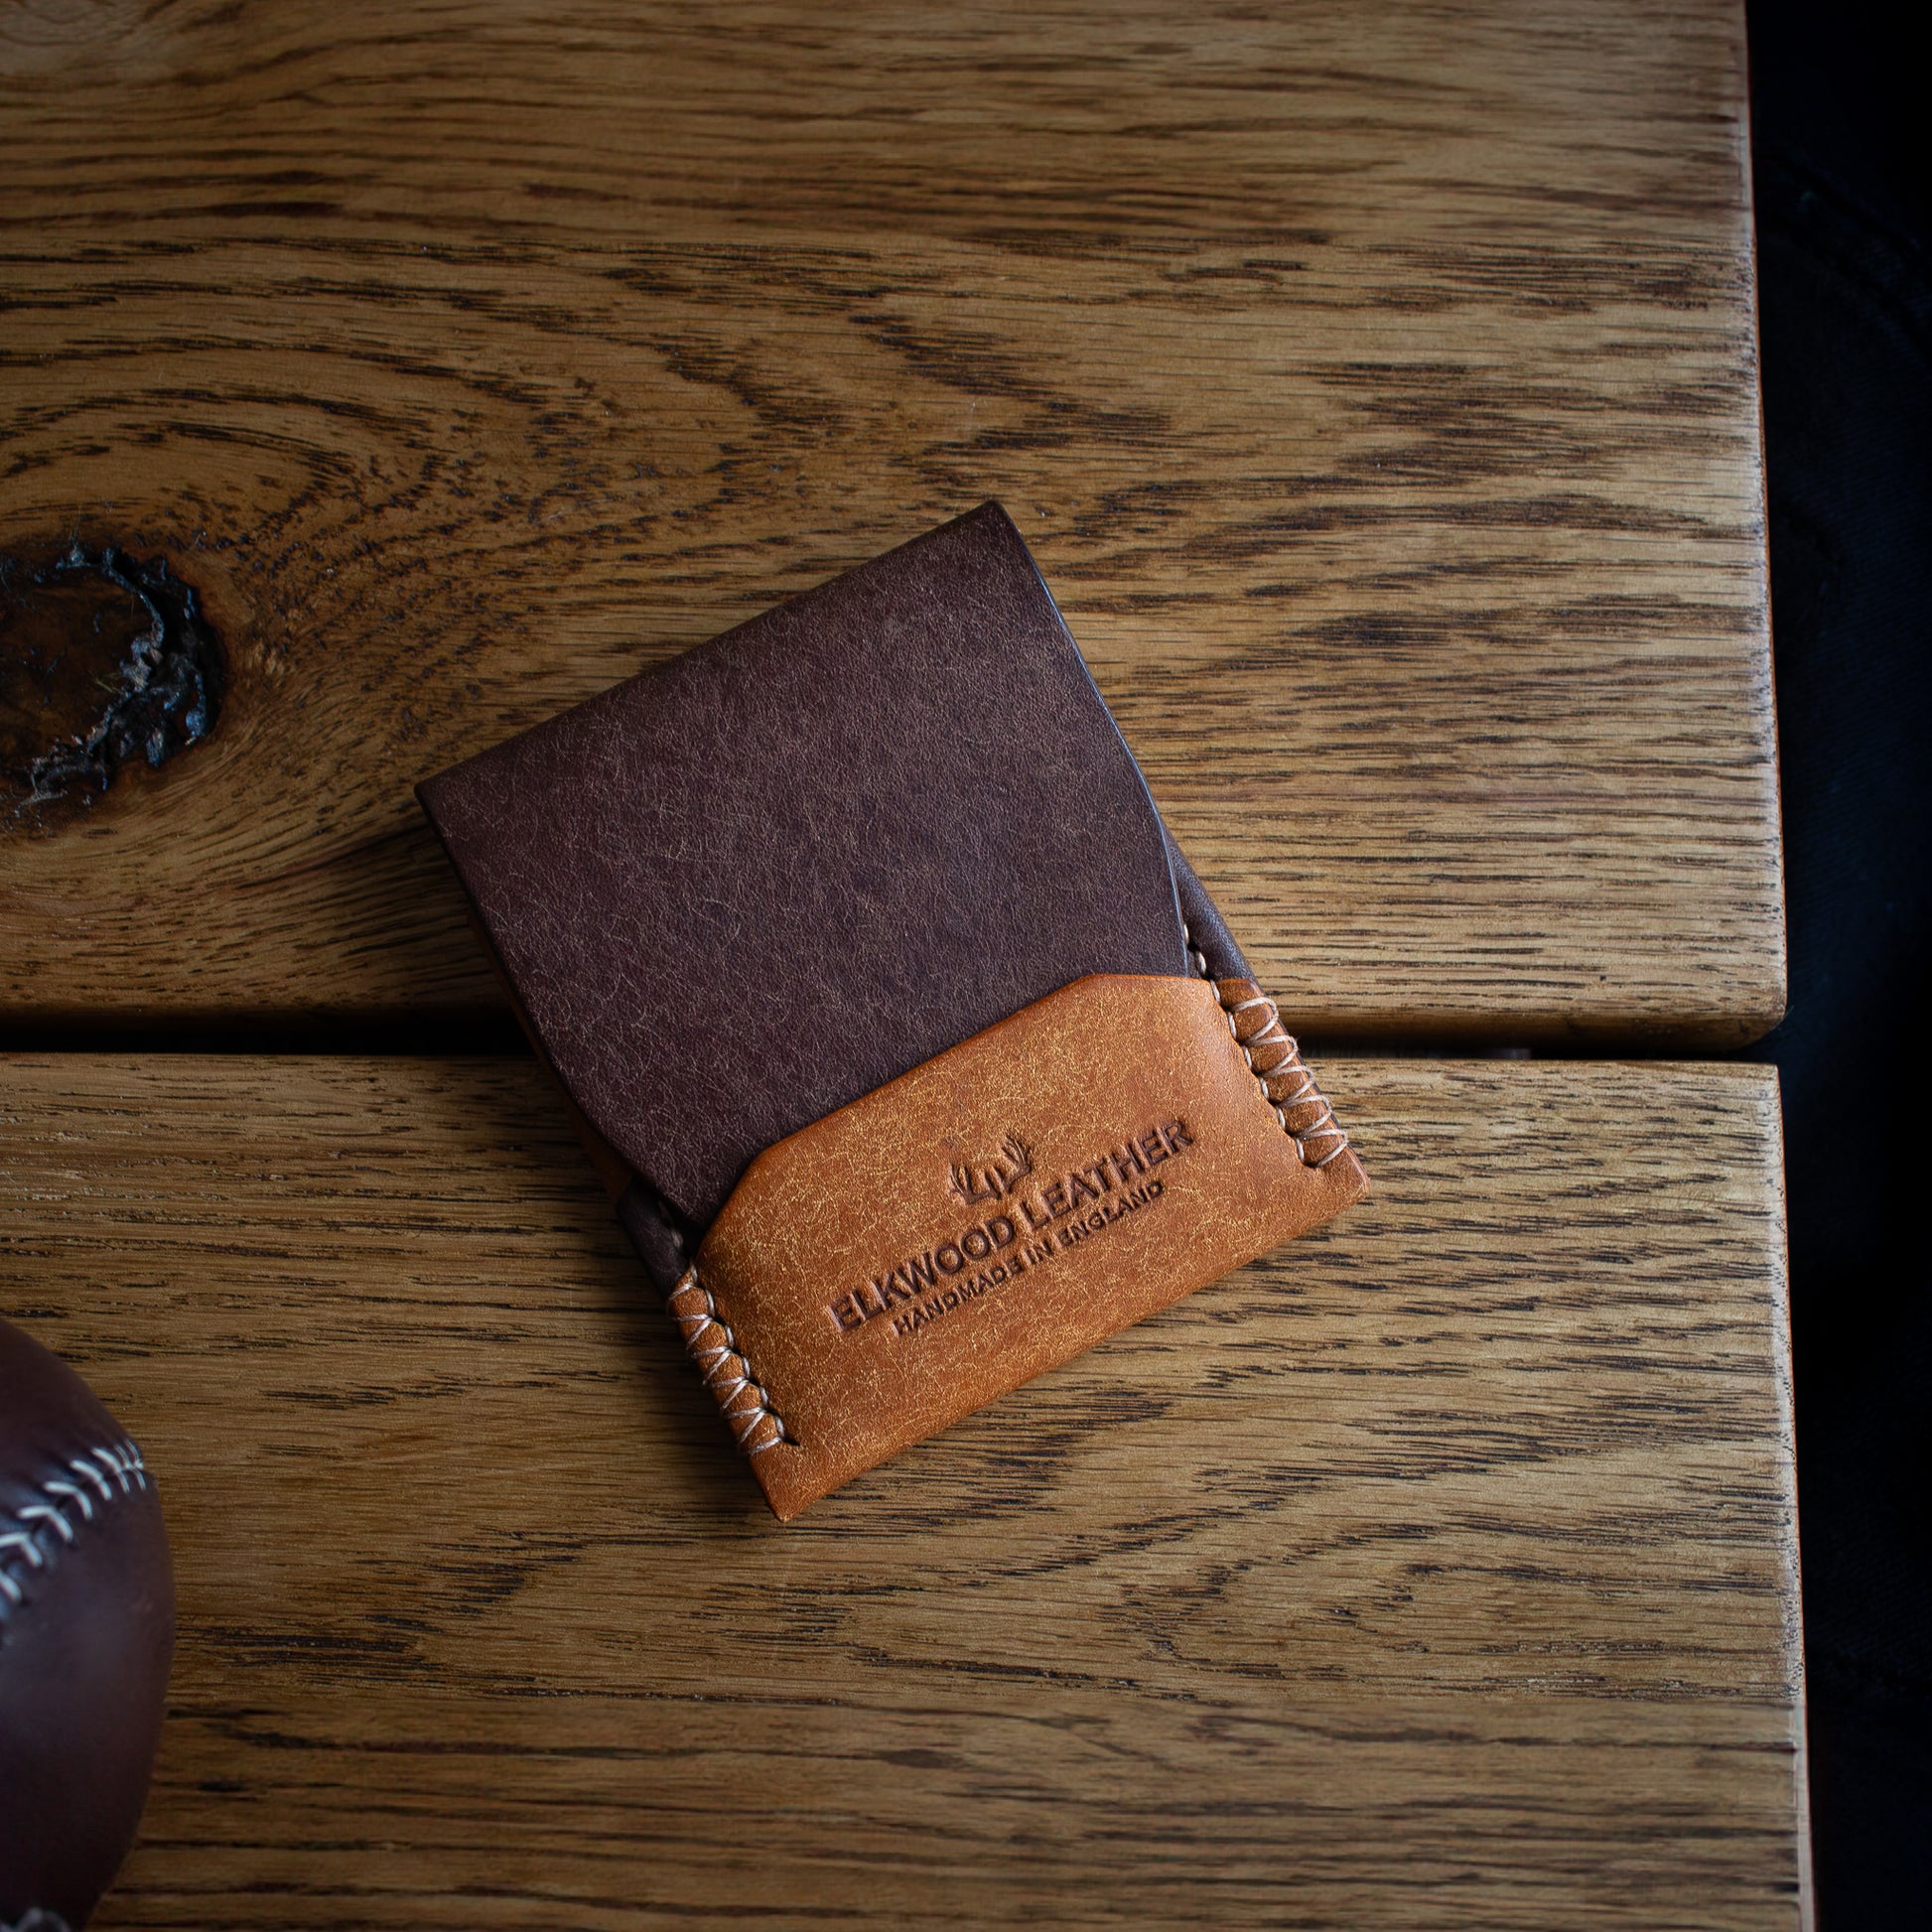 PDF TEMPLATE Elkwood Leather - The Blackthorn - EDC Flap full grain Italian Pueblo leather cardholder wallet closed wooden table next to brown leather baseball